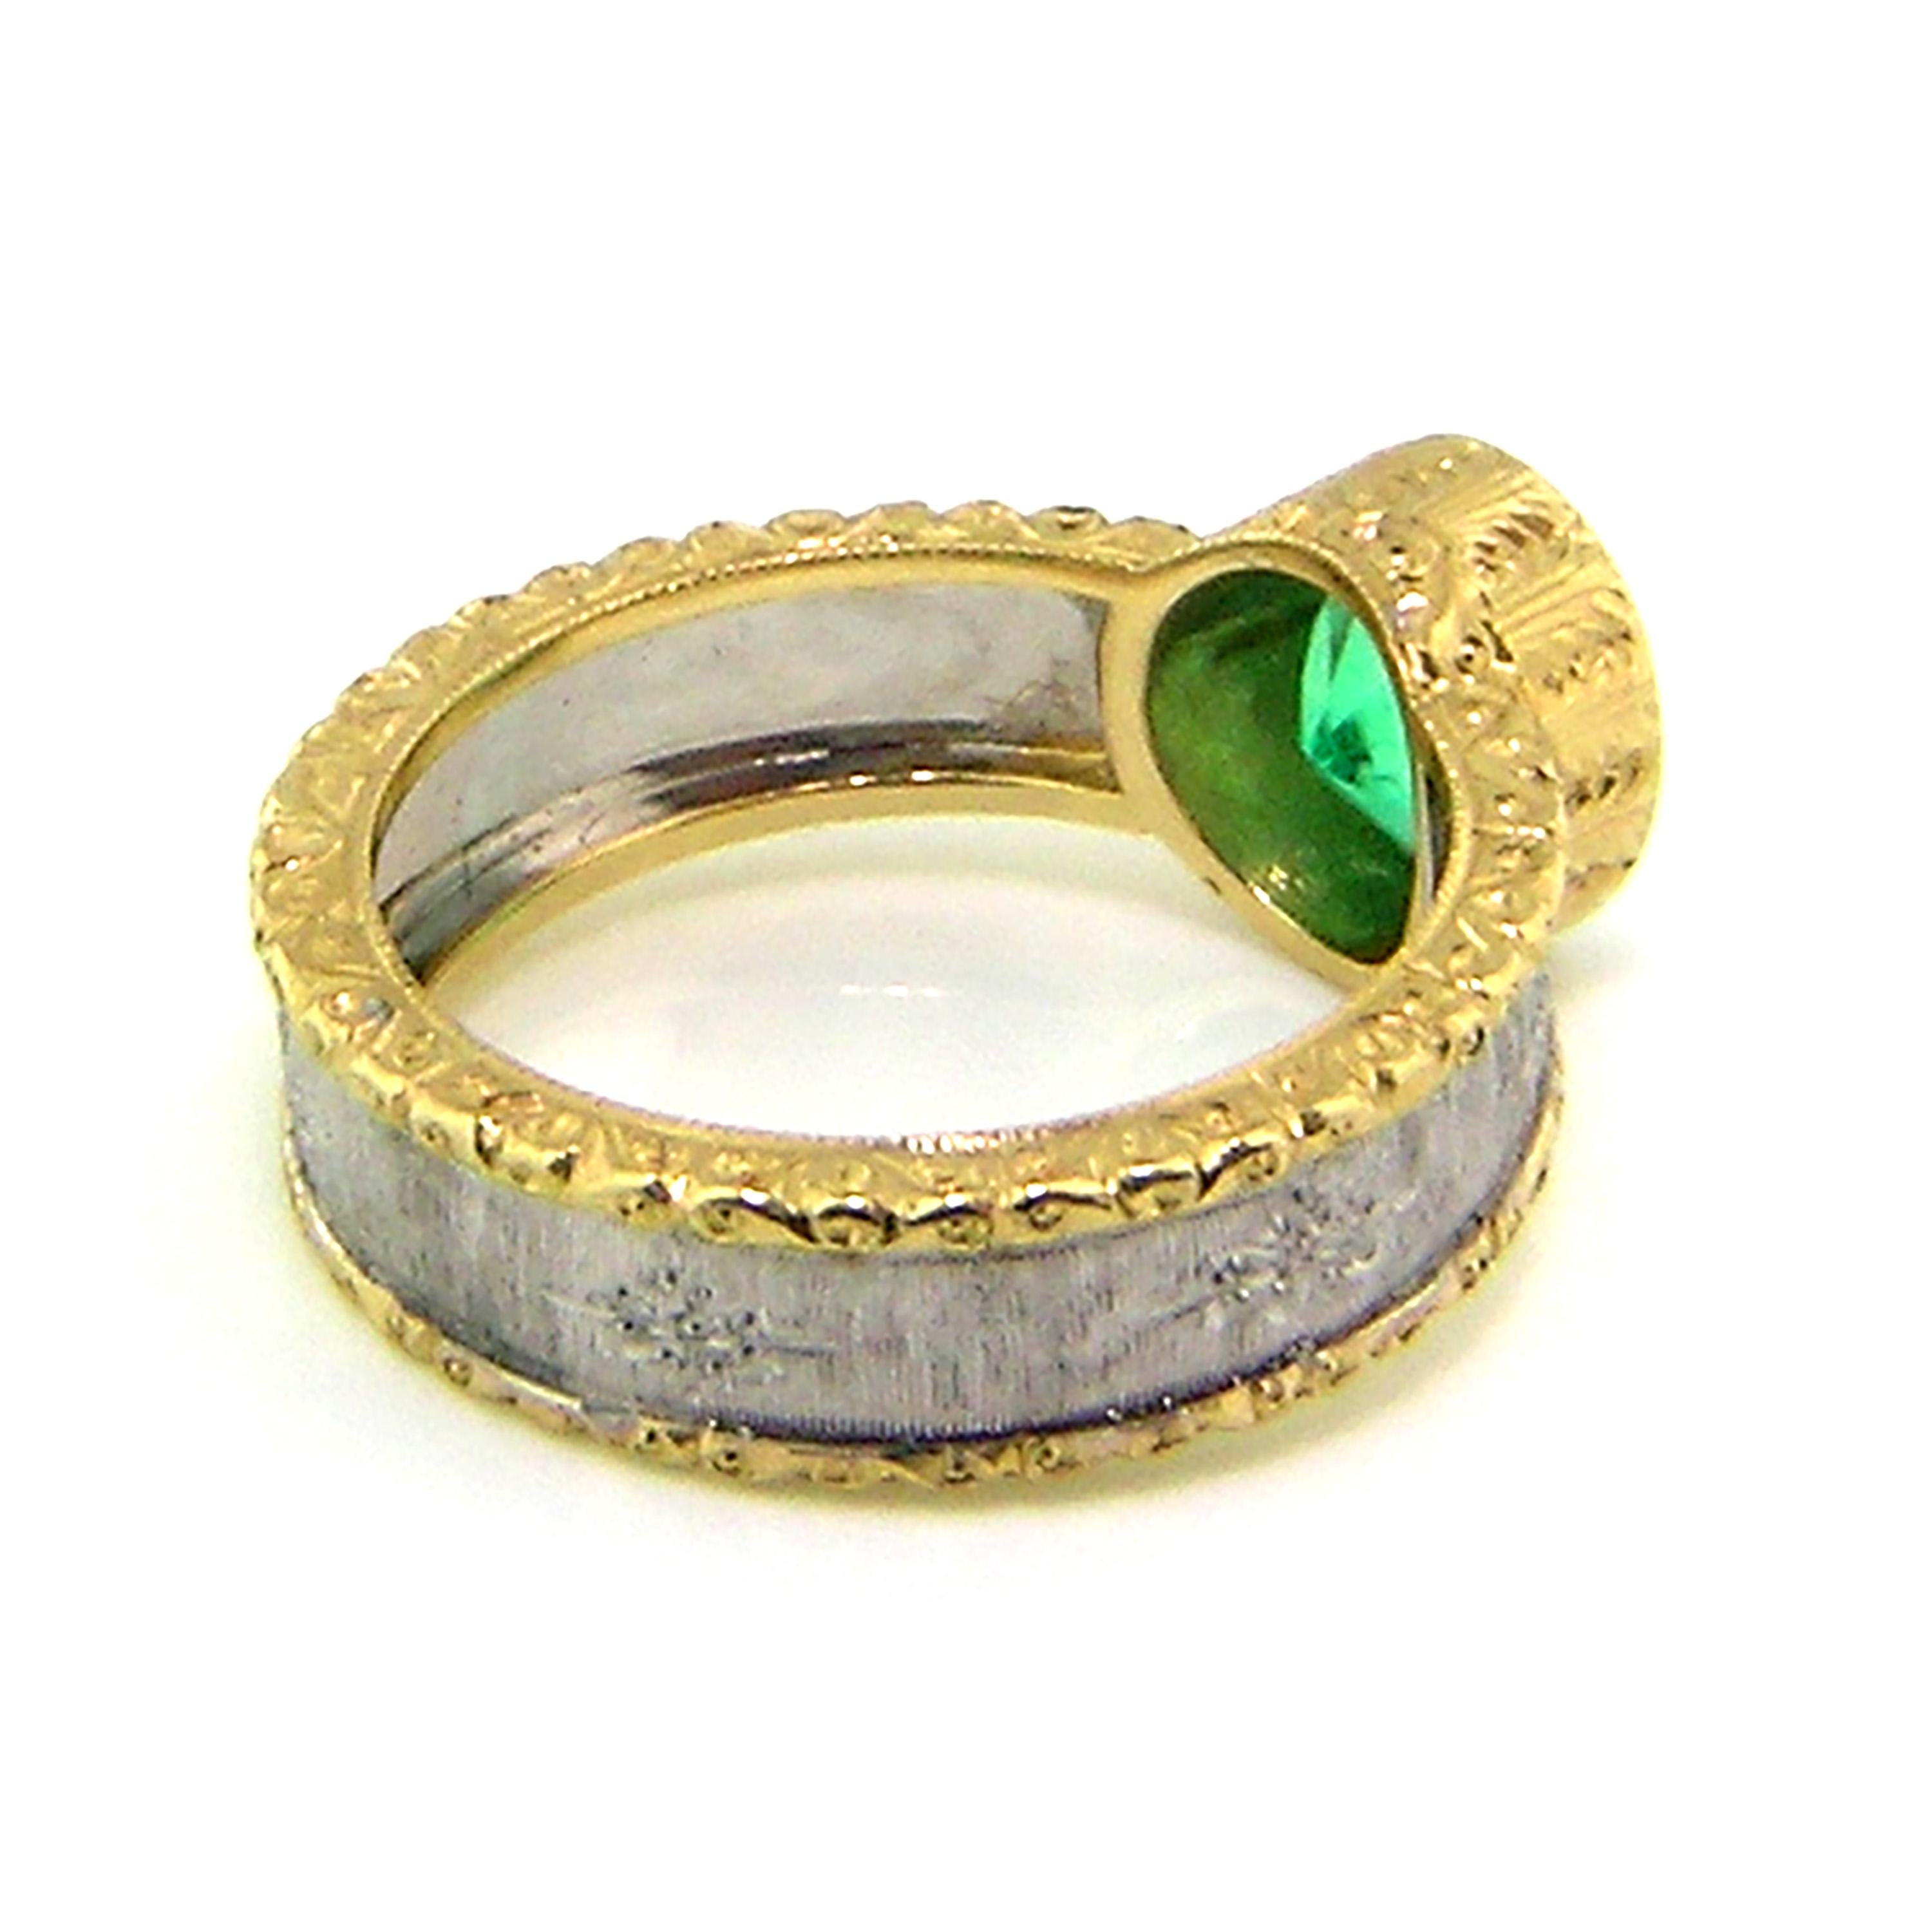 Women's 1.68ct Colombian Emerald in an 18kt Gold Ring, Handmade and Engraved in Italy